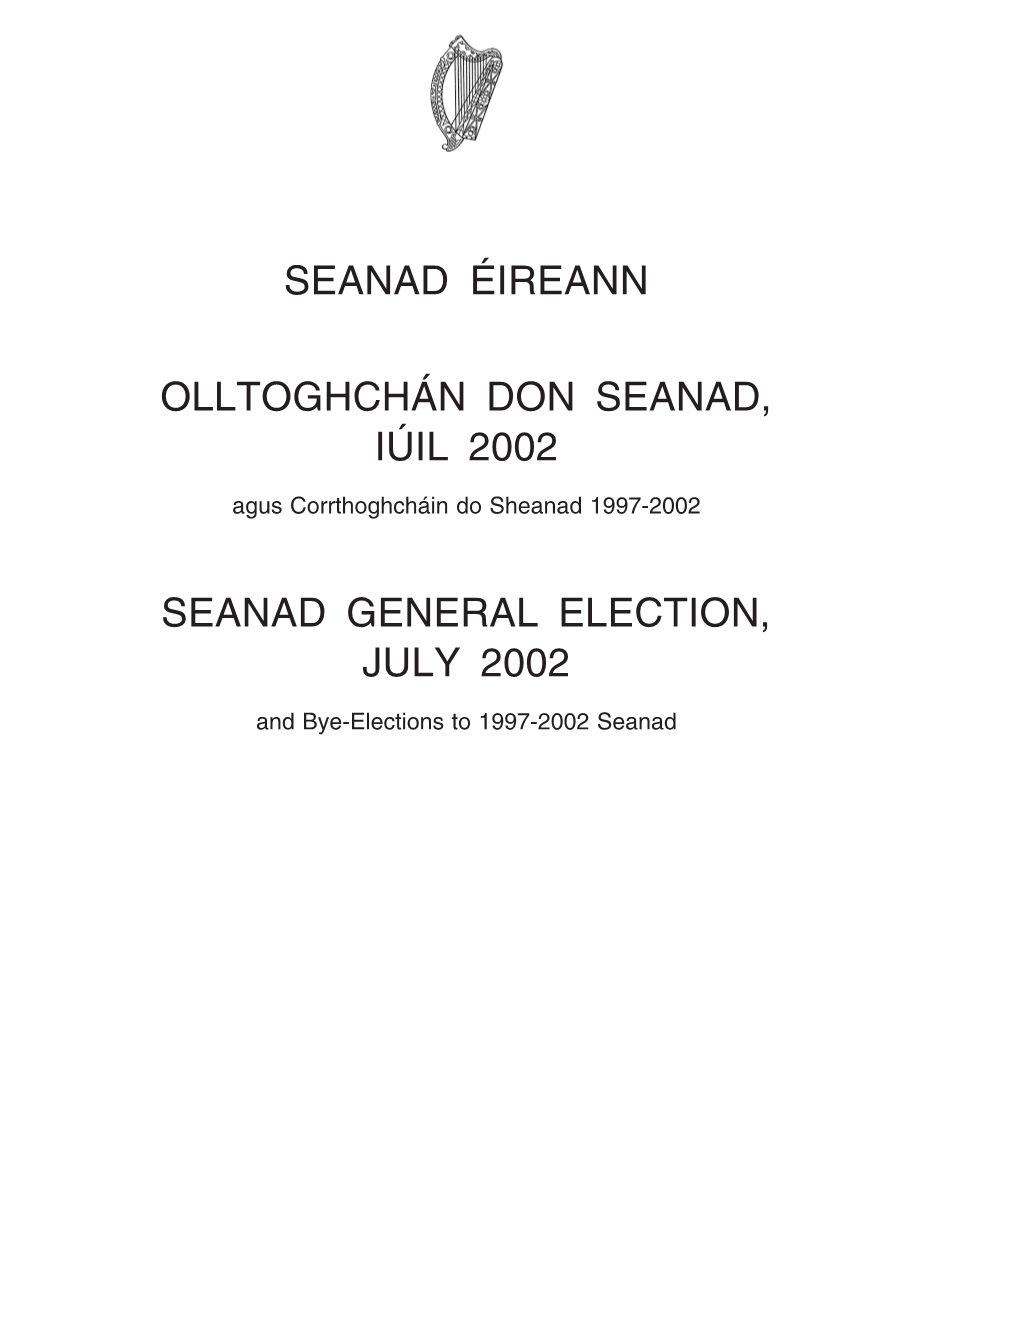 Seanad General Election July 2002 and Bye-Election to 1997-2002